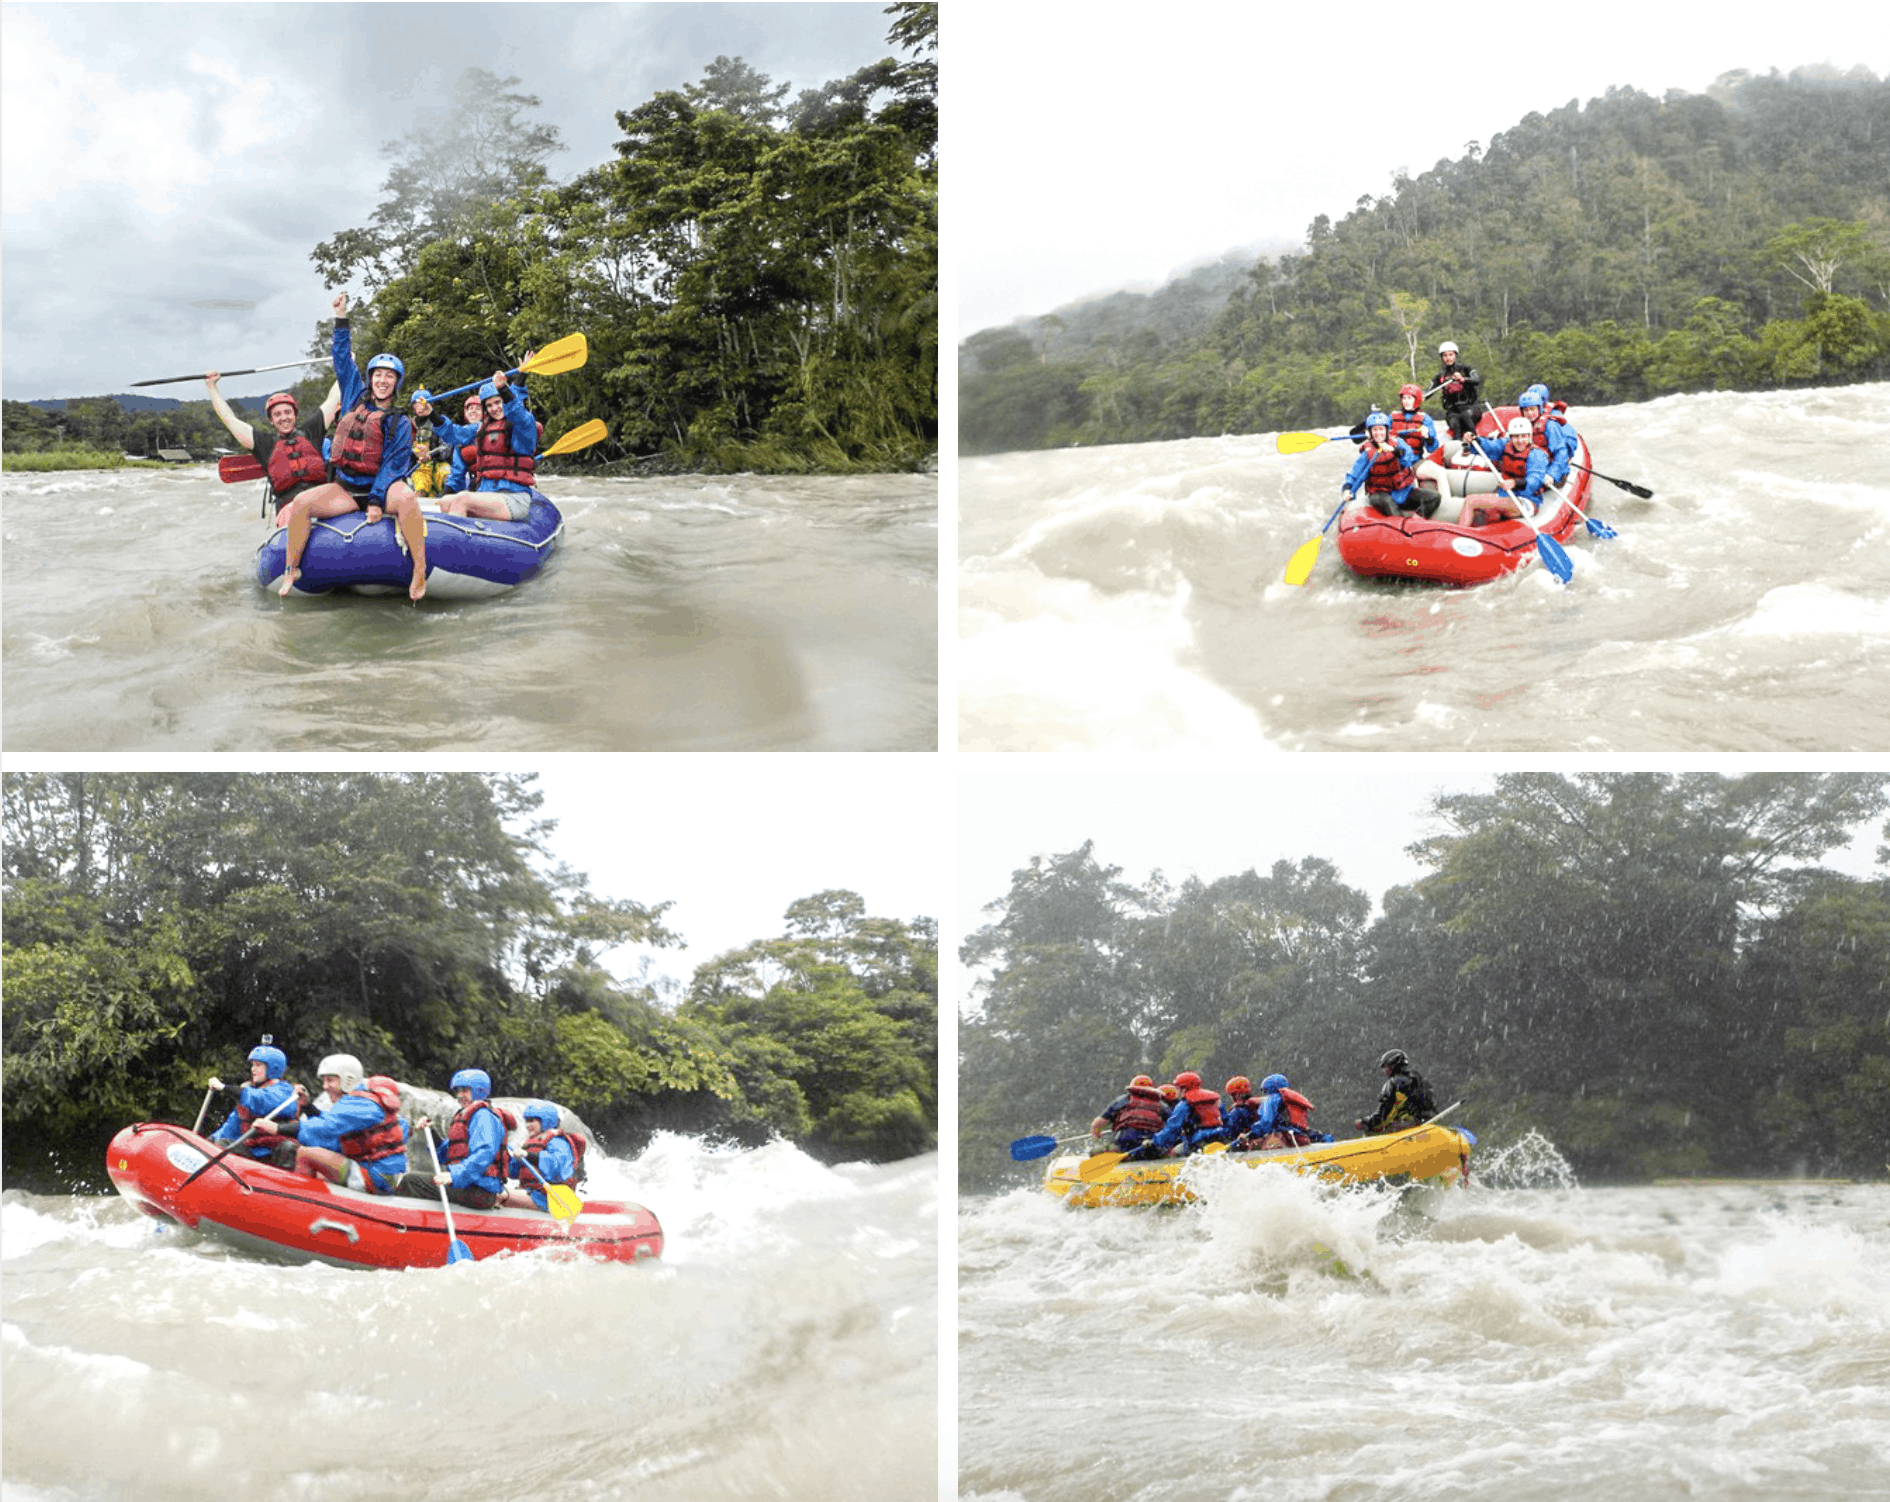 Four images showing people water rafting in the Ecuador Amazon Rainforest.